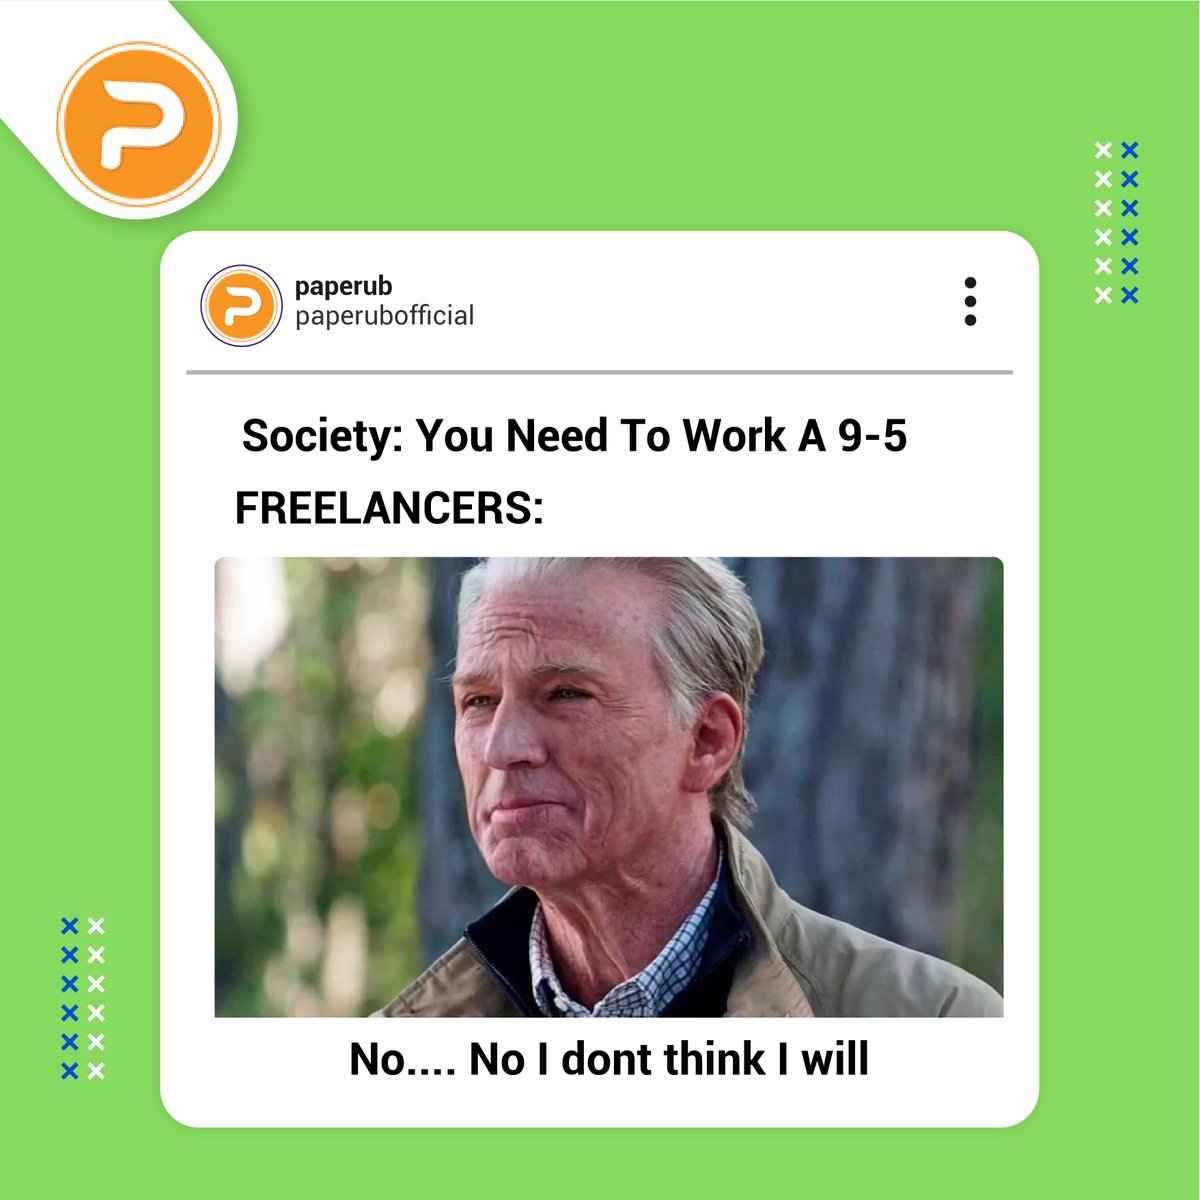 Paperub Society: You Need To Work A 9-5. FREELANCERS: No... No I don't think I will 😎 

Click This Link To Sign Up:- rb.gy/23d9a2

#FreelanceLife #No9to5 #Paperub #PaperubSociety #No9to5 
#FreelanceLife #FlexibleWork #NoMore9to5 #FreelanceFreedom 
#WorkYourWay